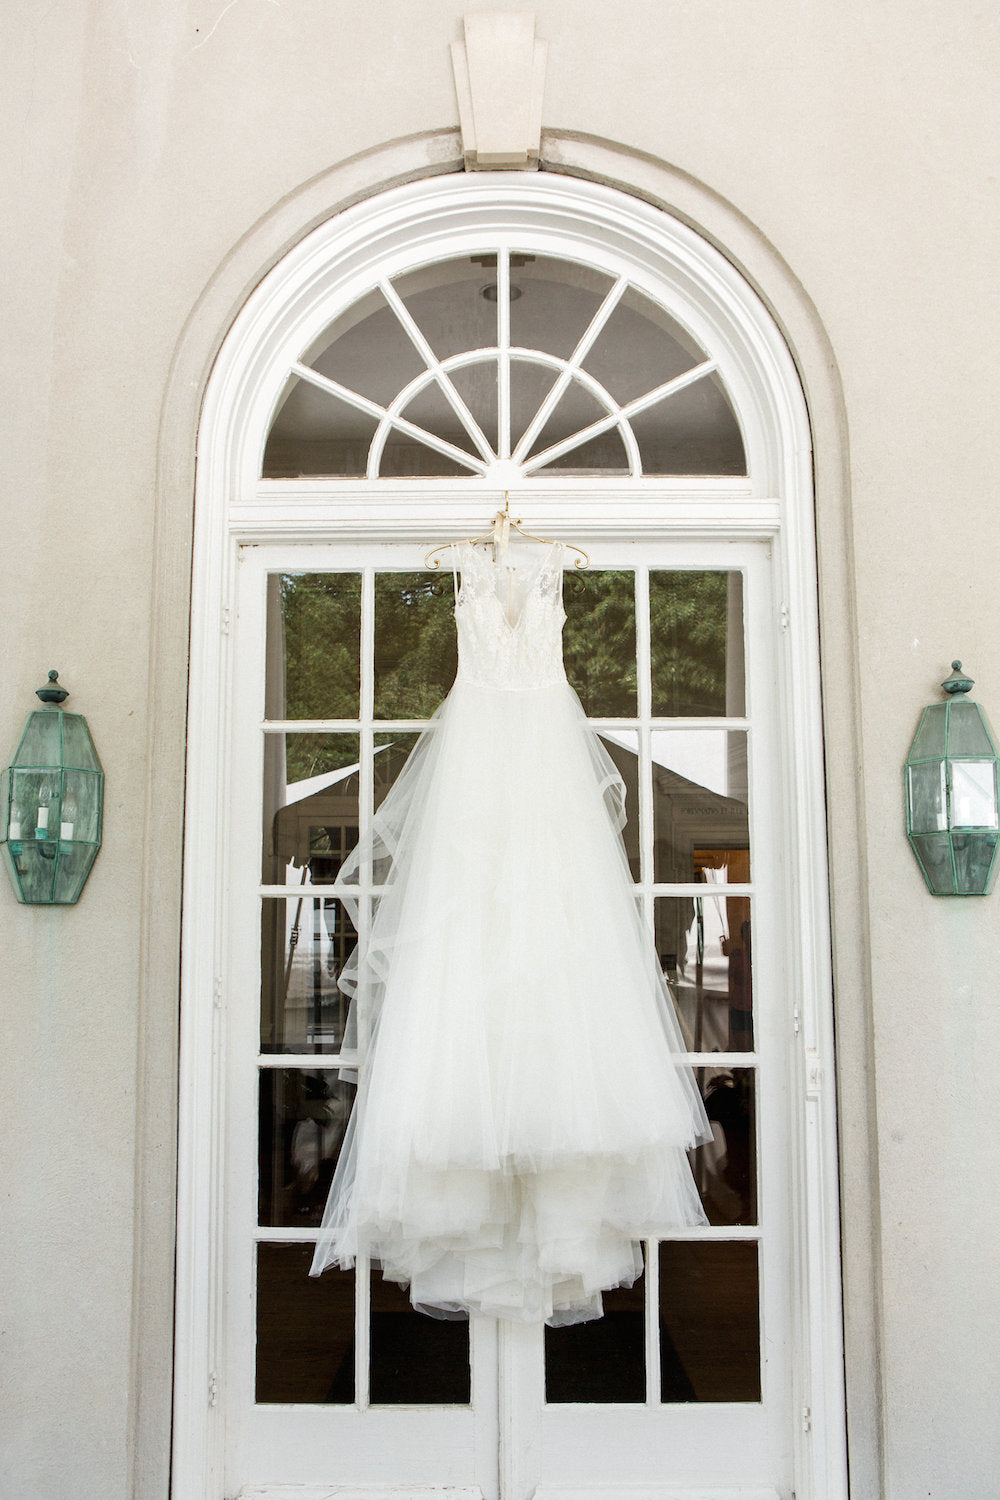 hanging wedding dress - tips about trying wedding dresses on at home from The Garter Girl